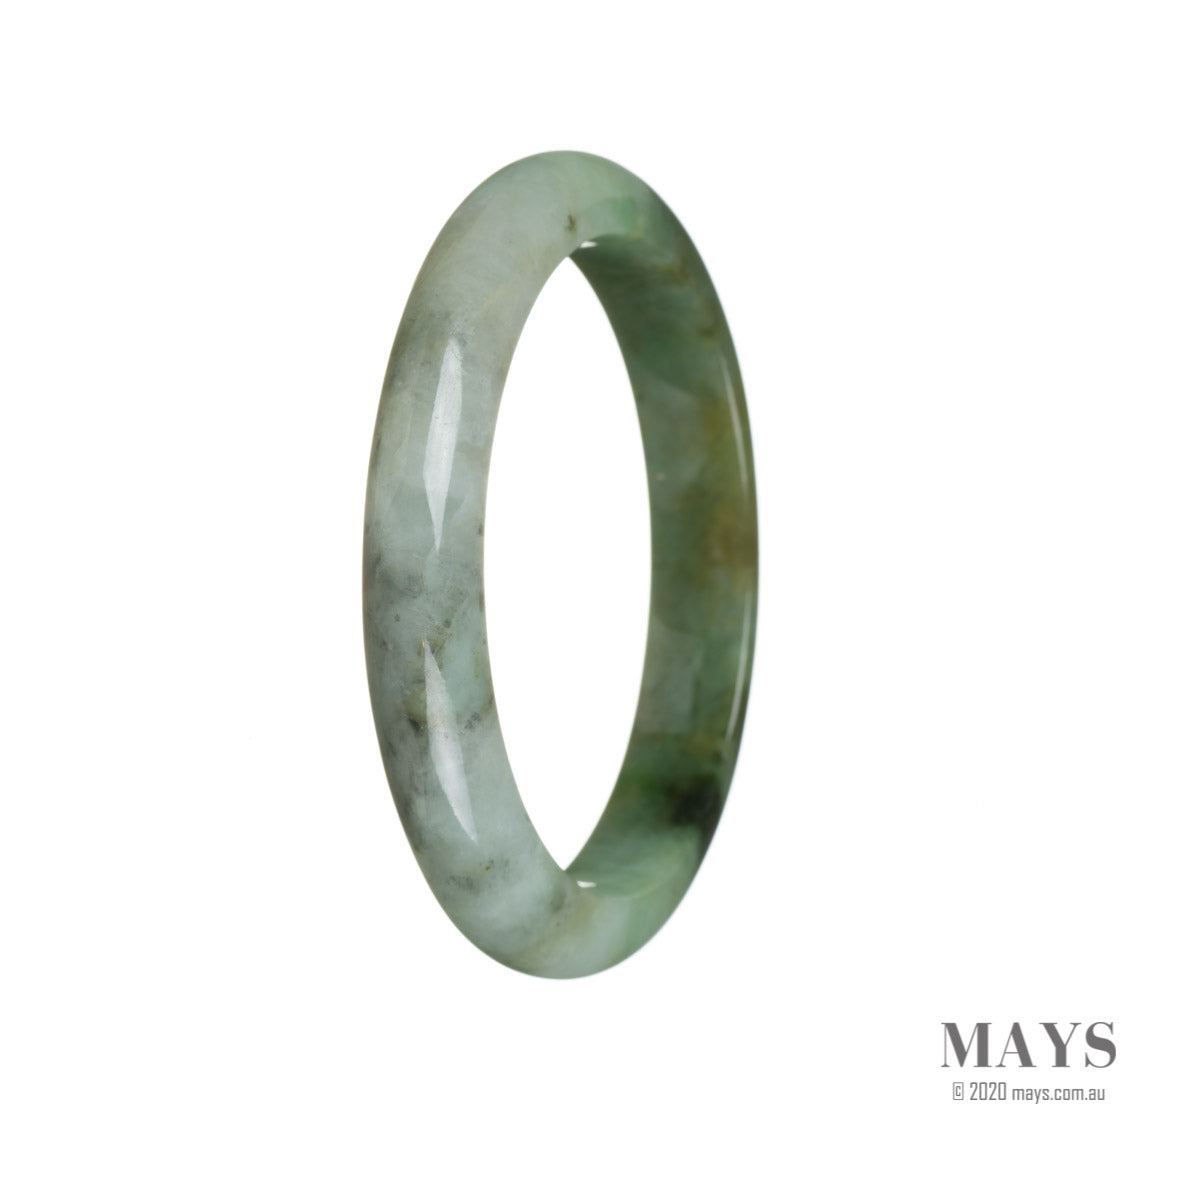 A close-up image of a beautiful semi-round jade bracelet with a green color and intricate patterns.